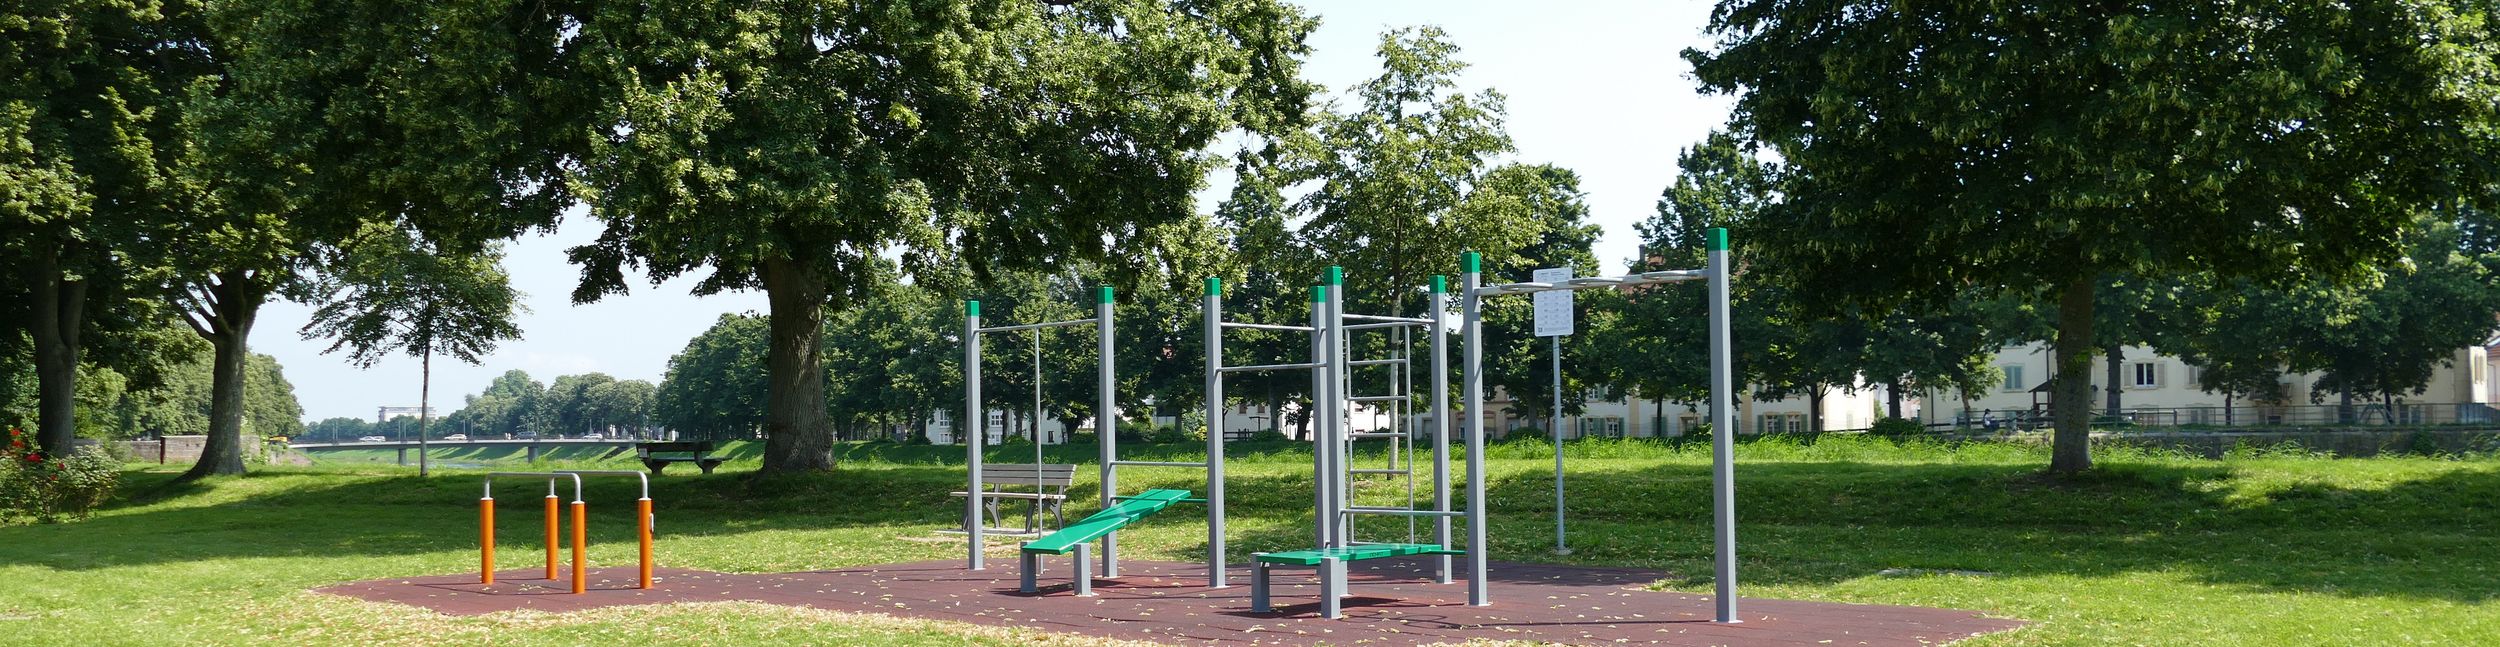 Calisthenics facility on a meadow, consist of several devices with bars, in the background trees and houses